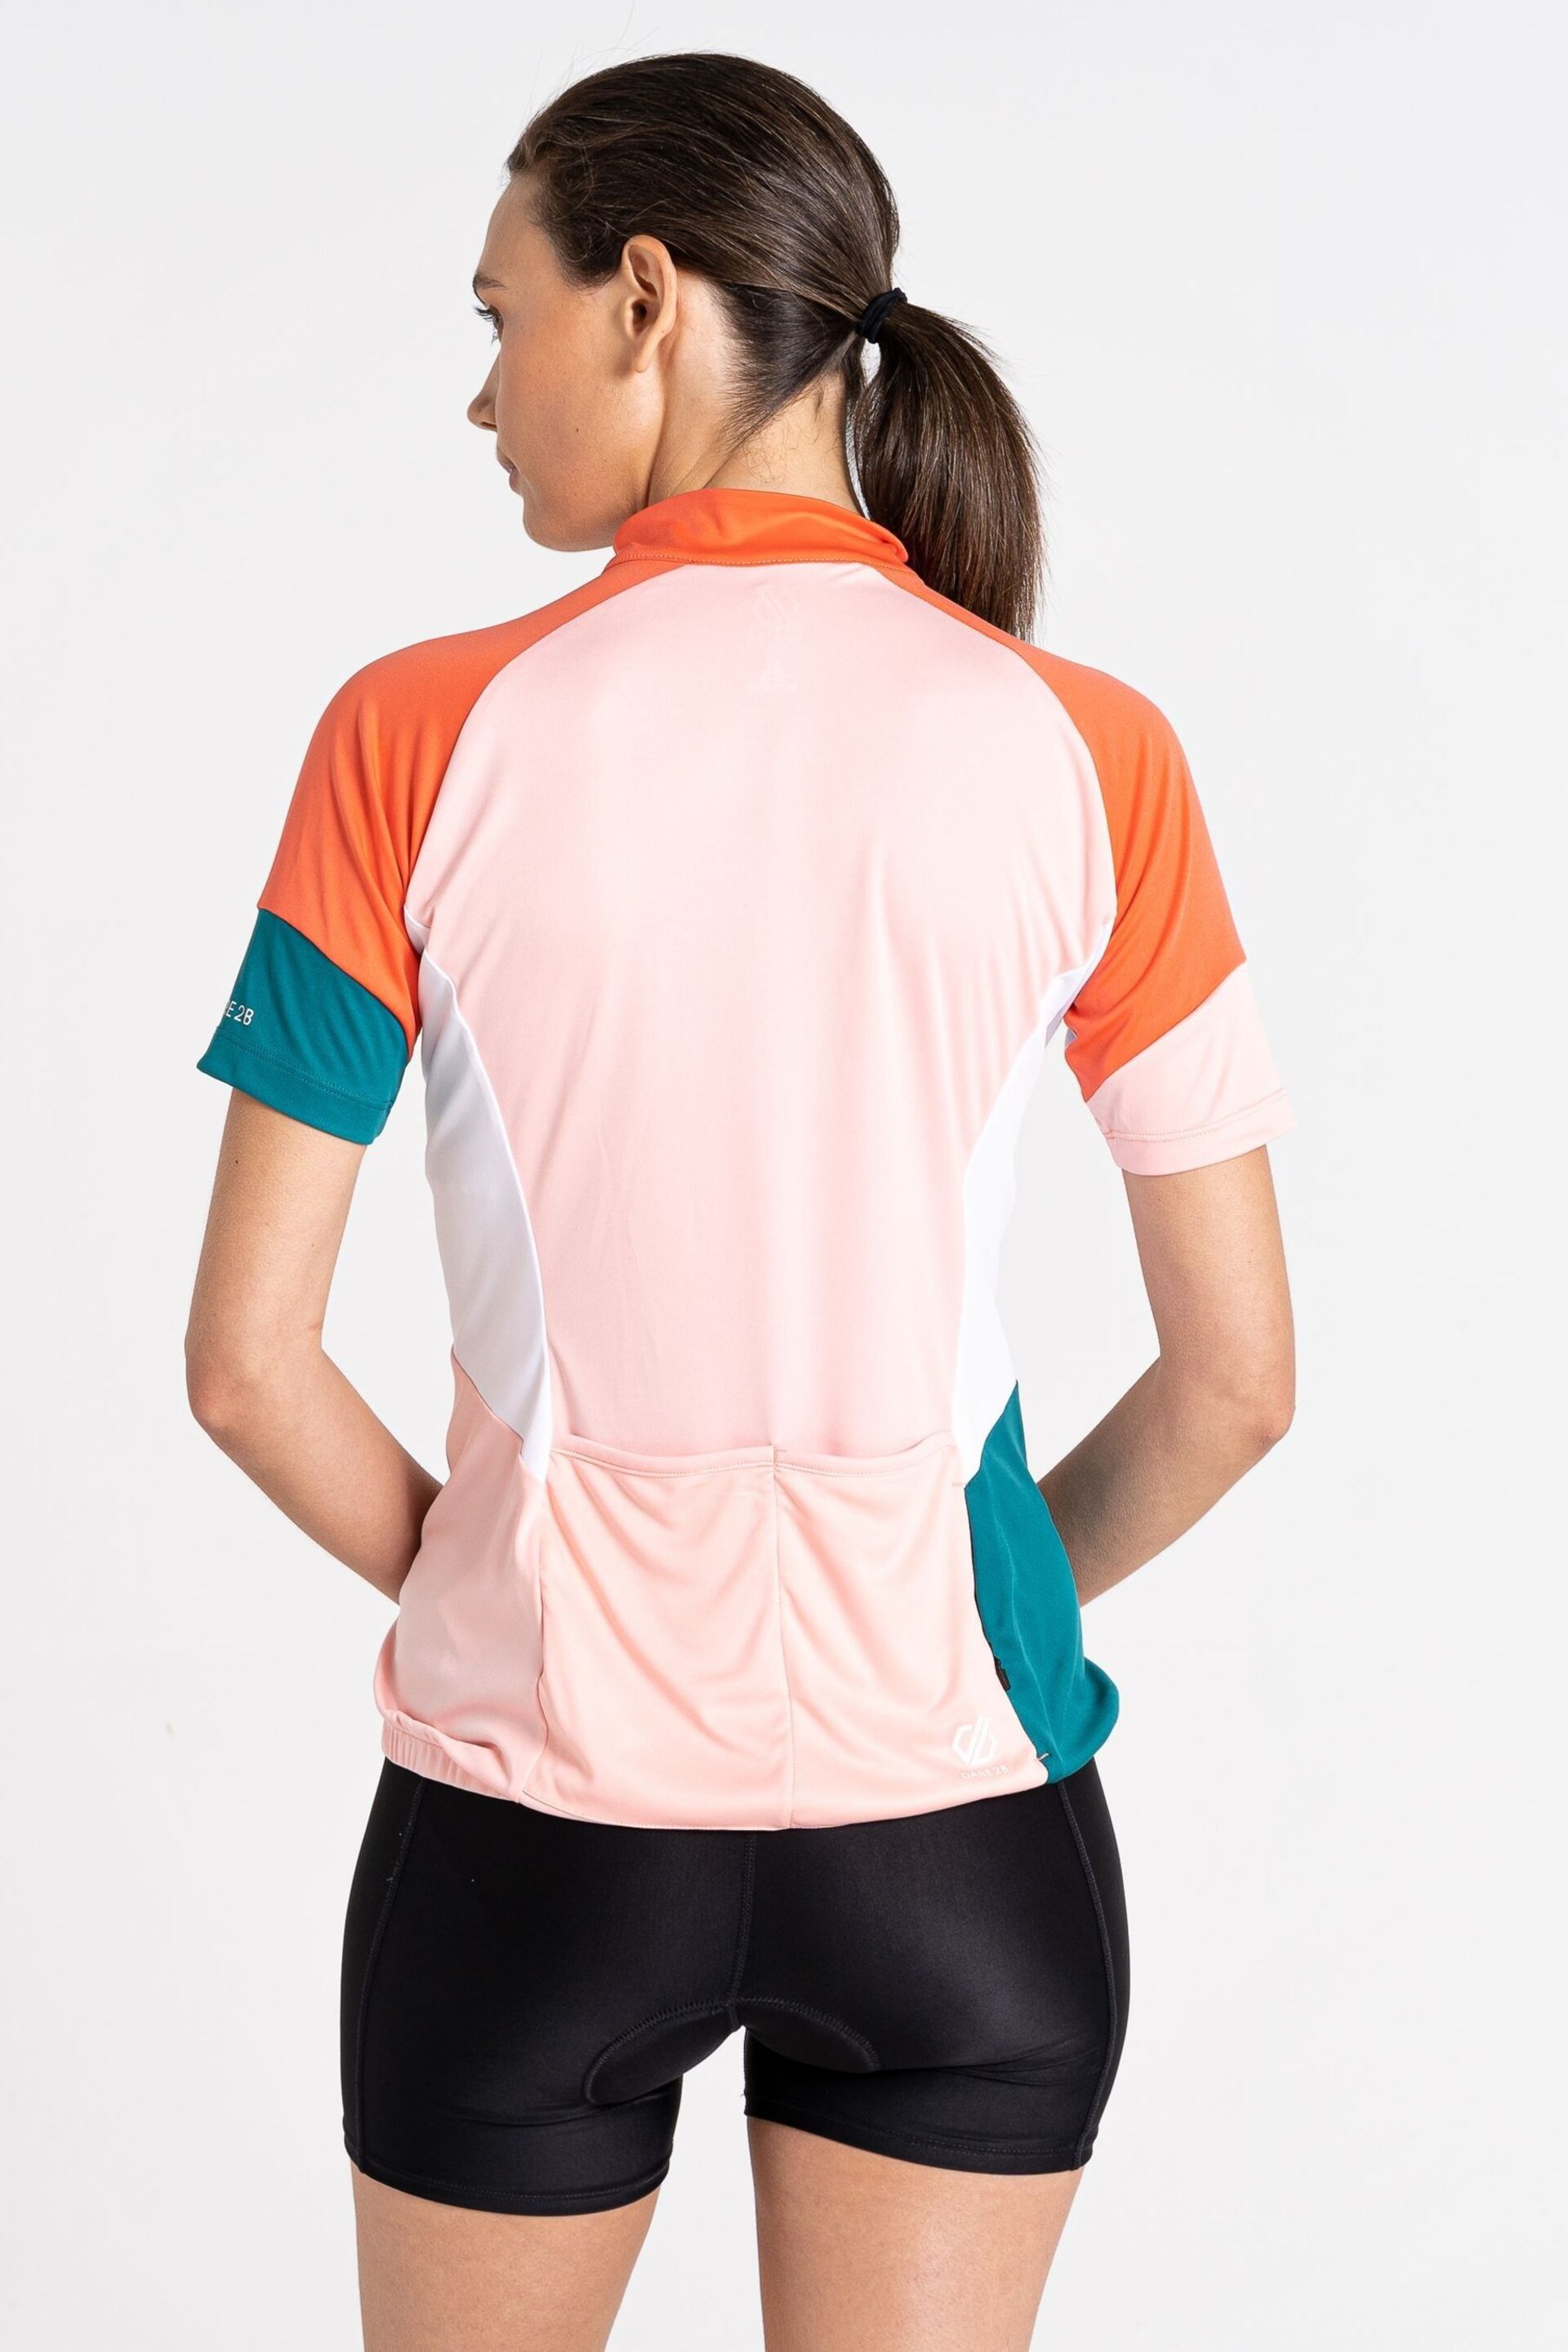 Dare 2b Compassion II Cycle Jersey - Image 3 of 6